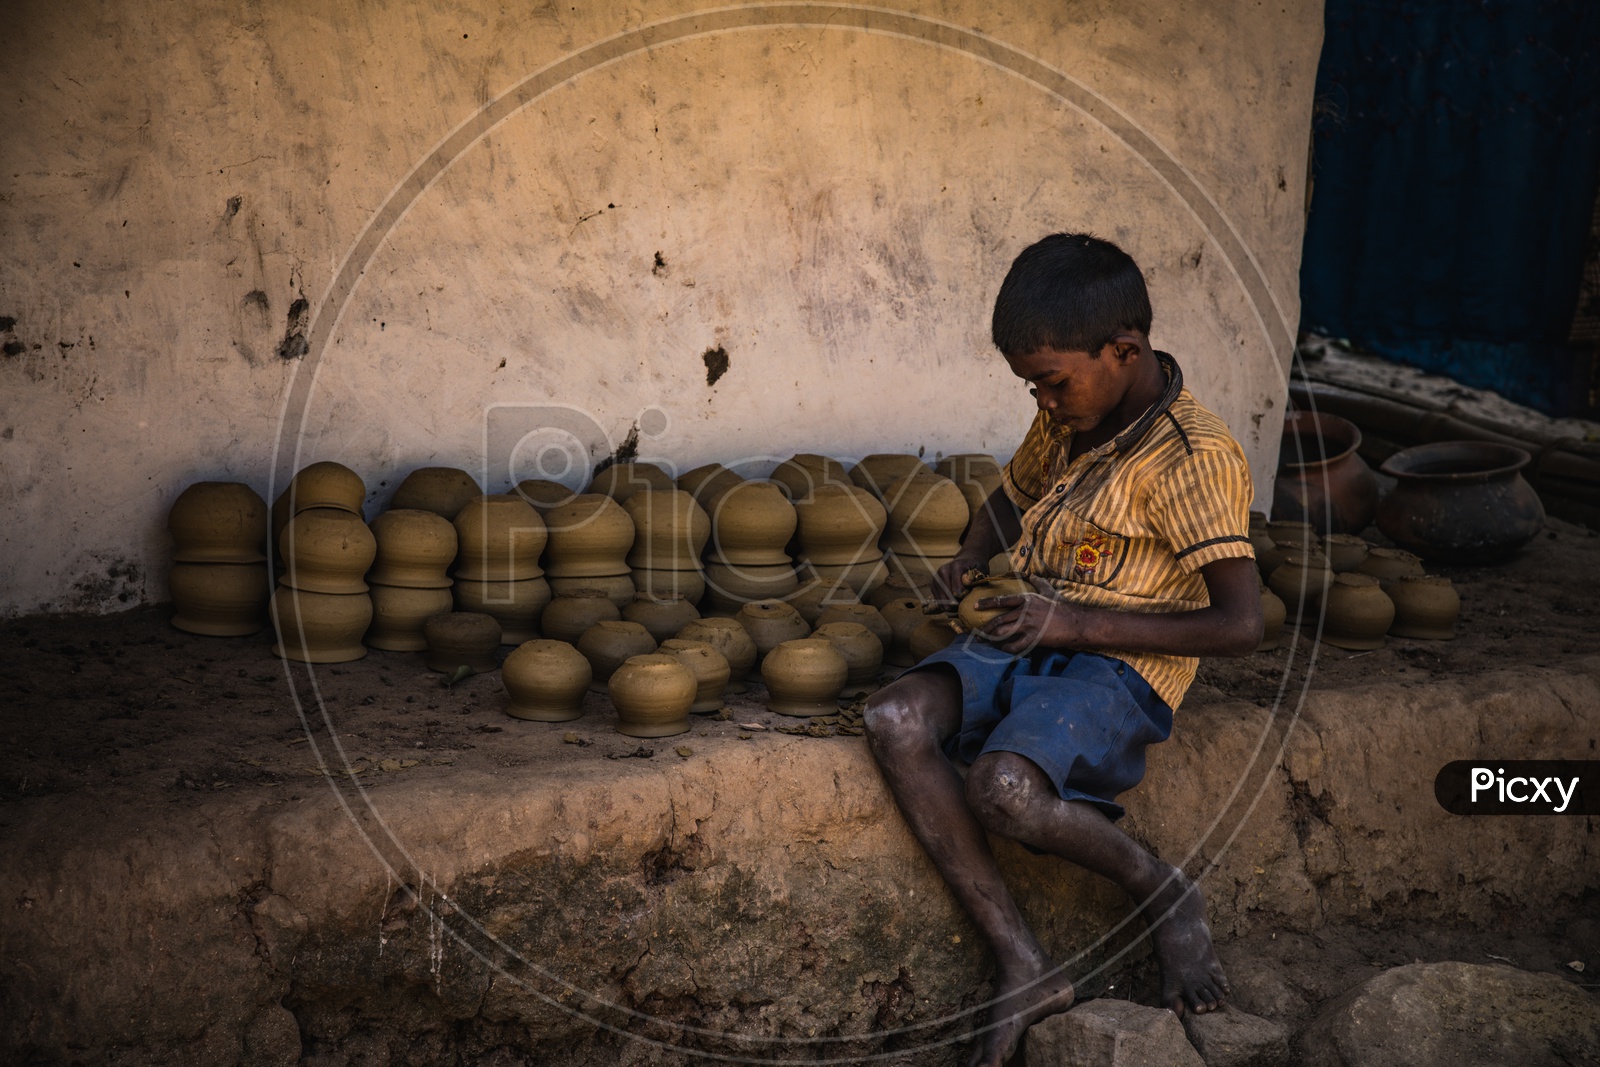 A Boy Carving The Clay Pots  in tribal Village